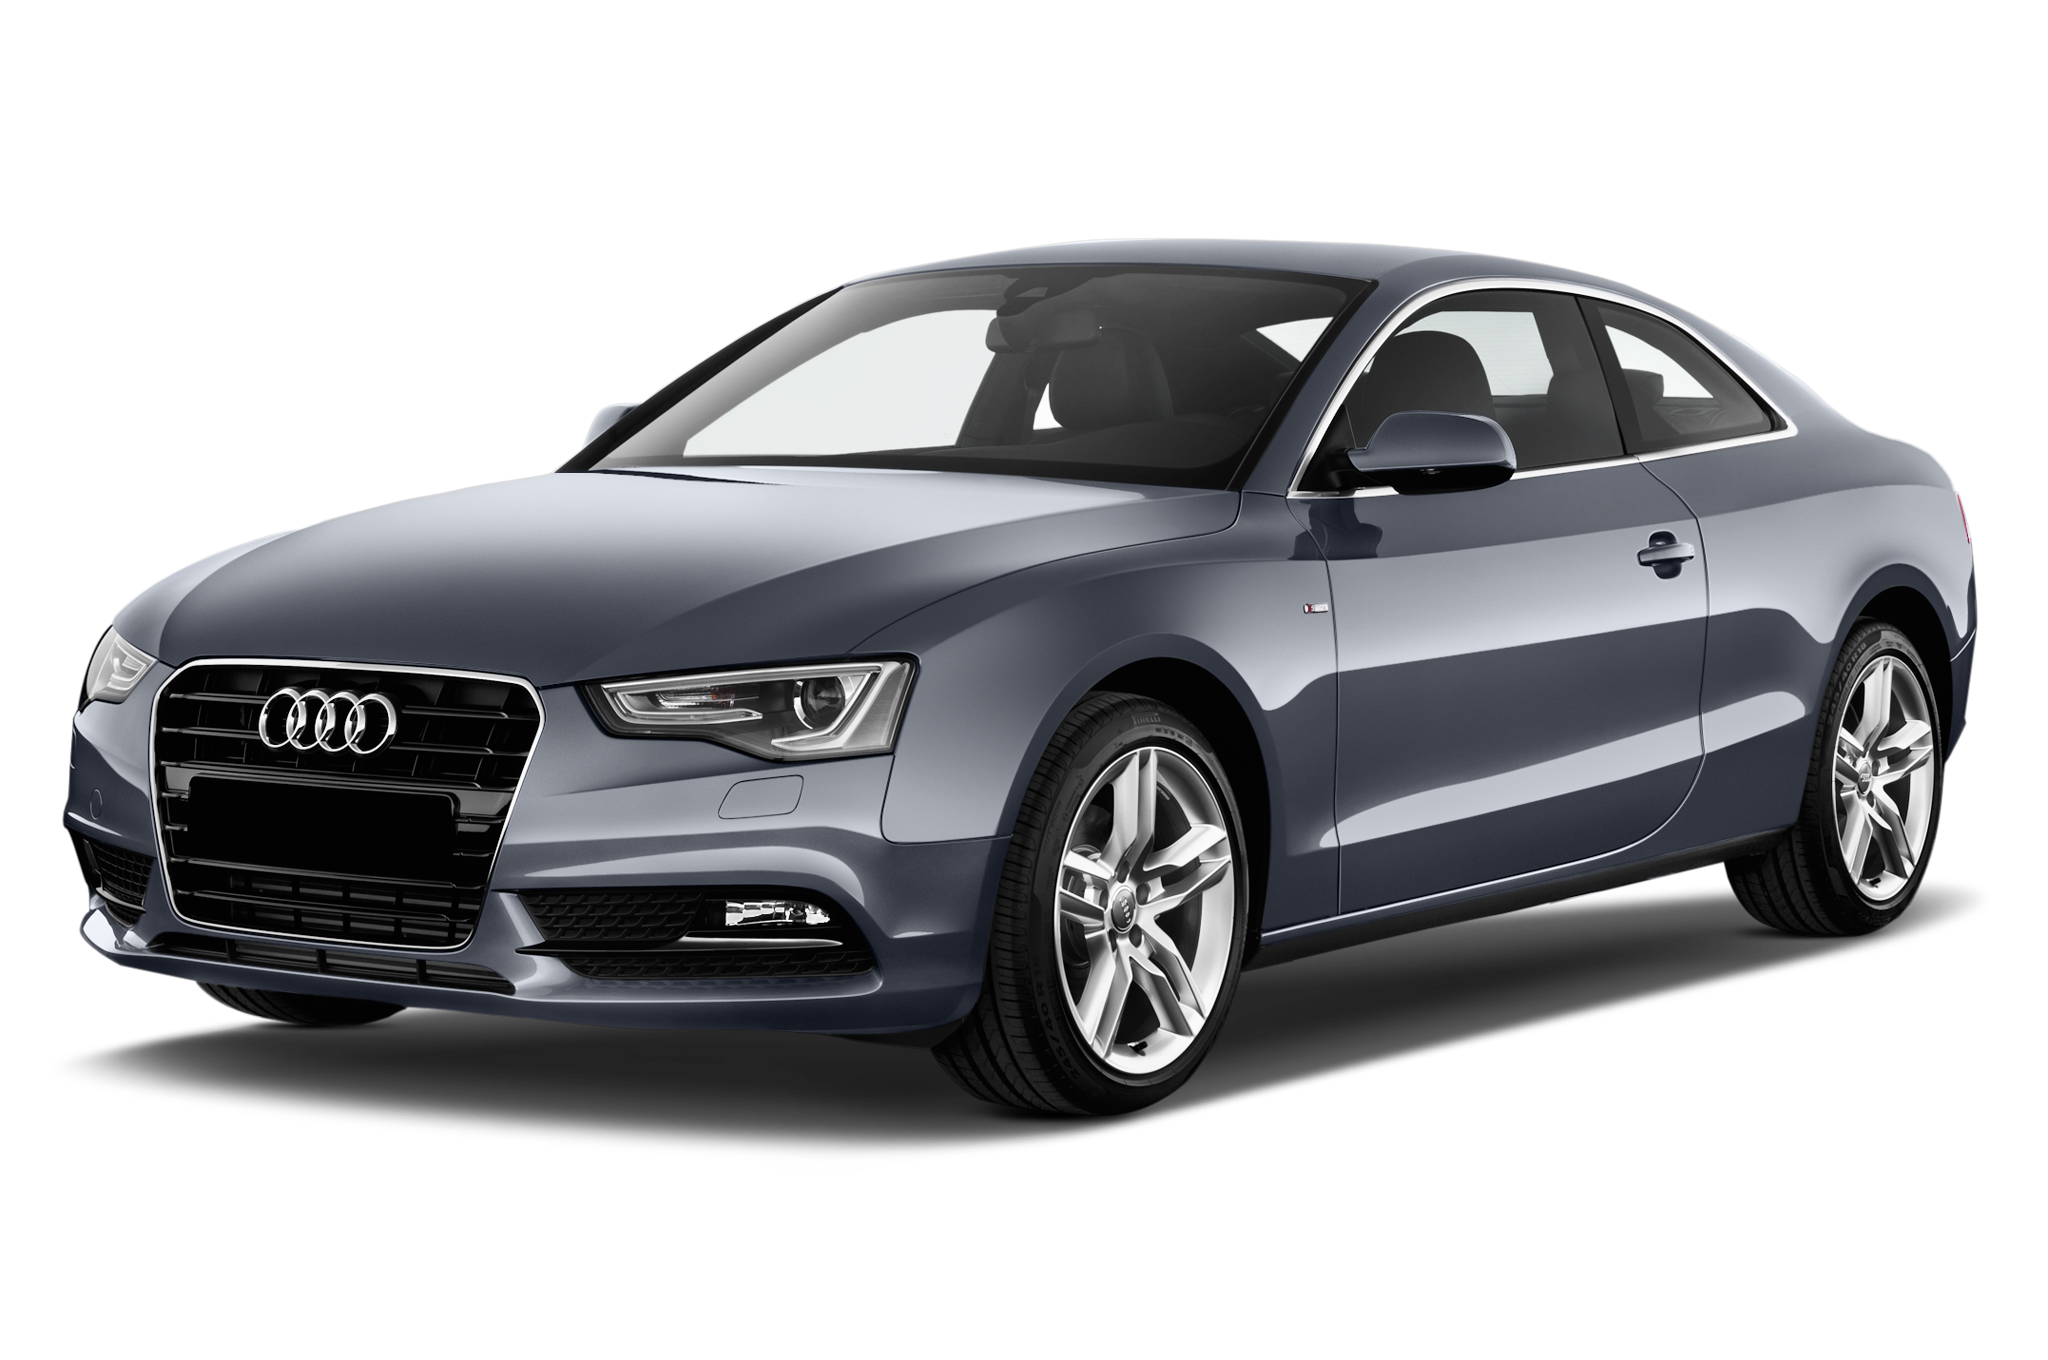 How Much It Cost To Rent Audi A5 Coupe In Dubai